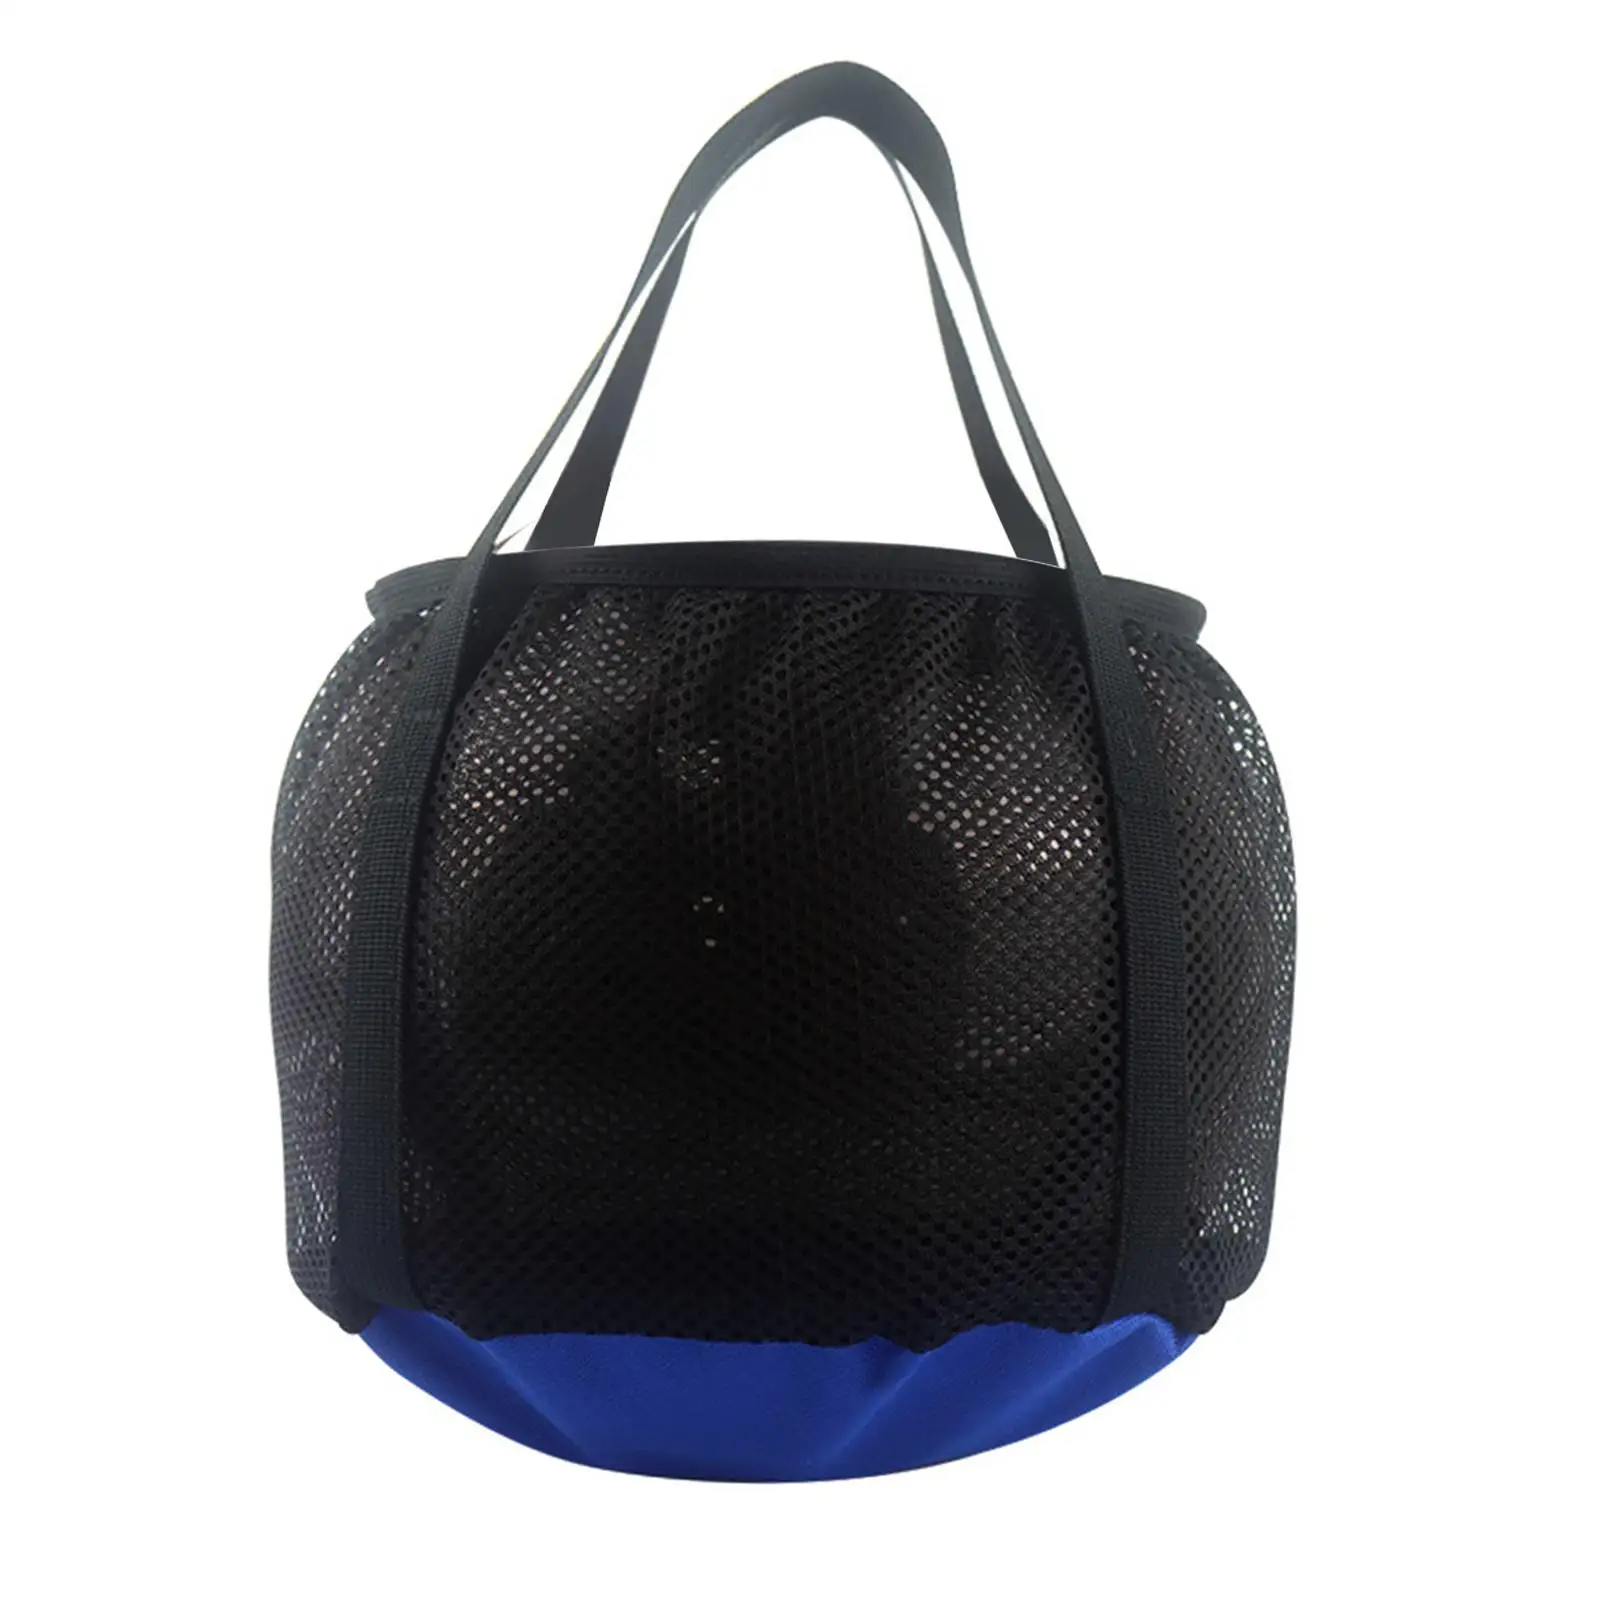 Portable Bowling Ball Bags Bowling Ball Holder with Handle Sport Pocket Tote Equipment Pouch for Women Men Gym Exercise 1 Ball